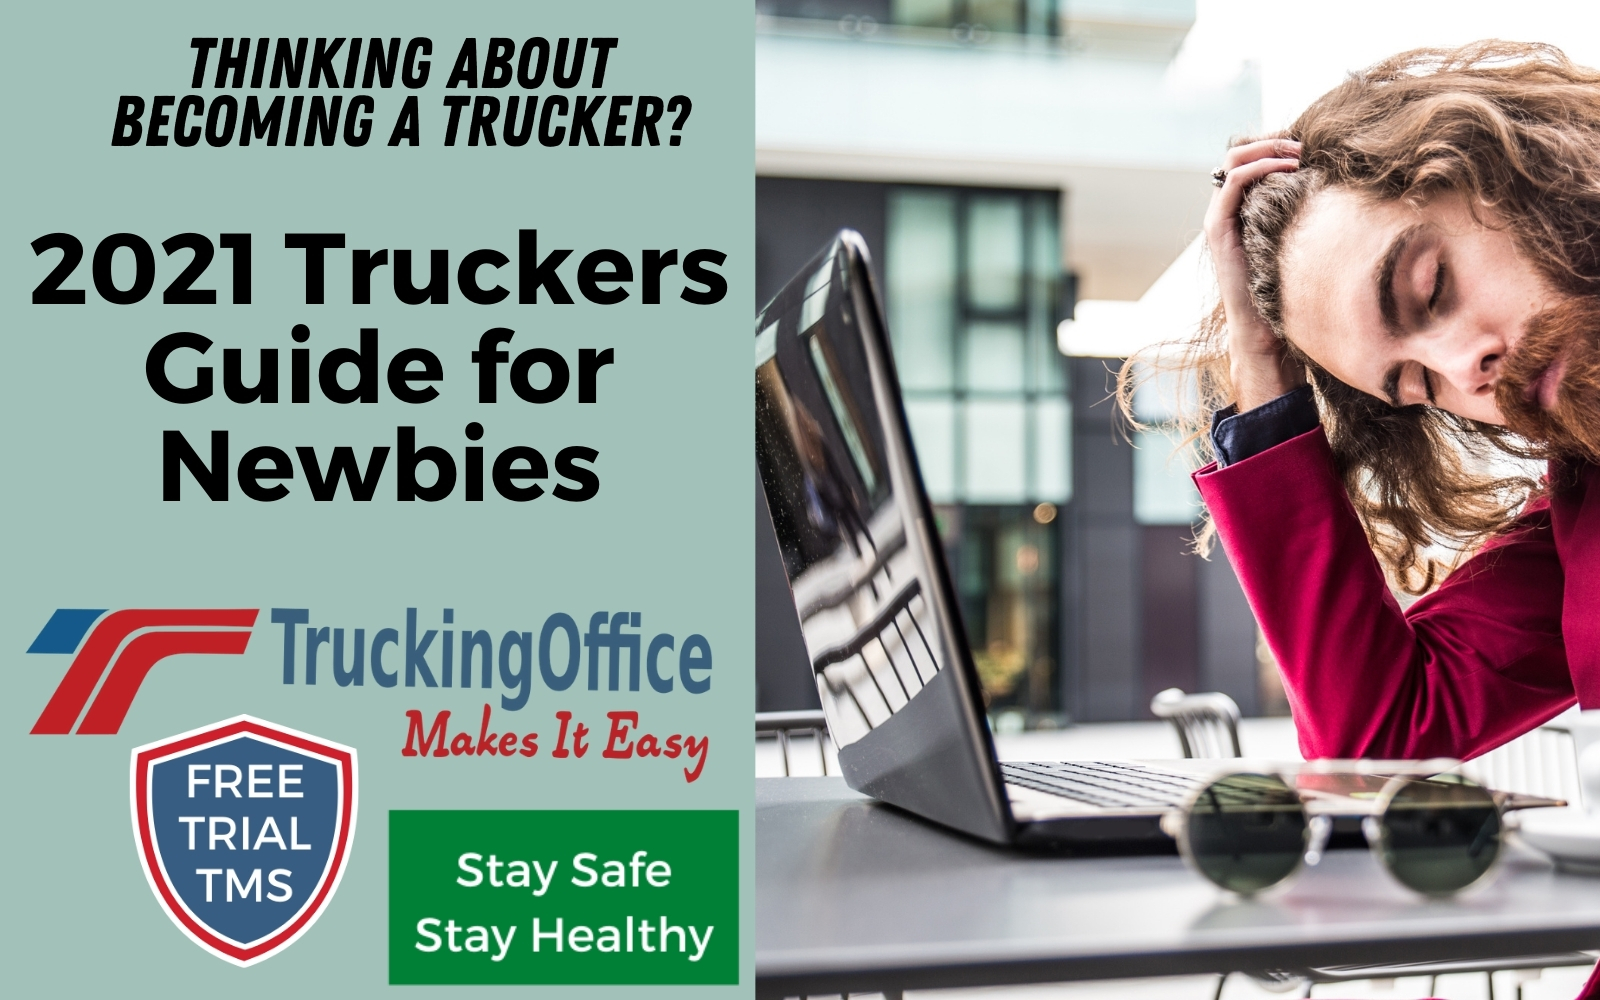 2021 Truckers Guide for Newbies